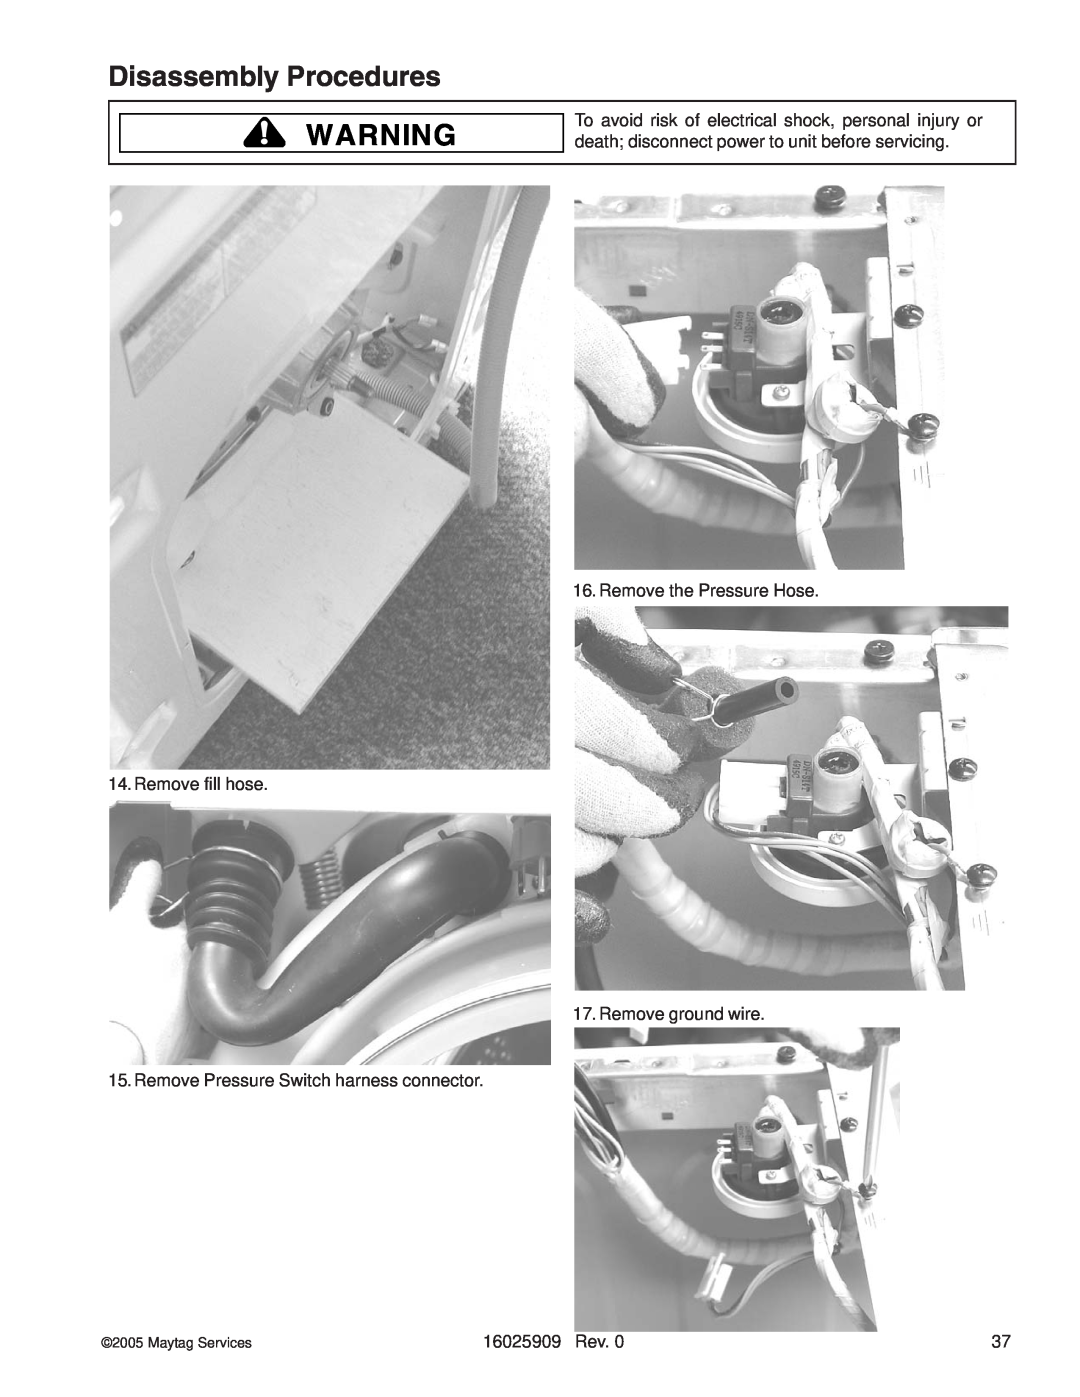 Whirlpool MAH9700AW Disassembly Procedures, Remove the Pressure Hose 14.Remove fill hose, 16025909 Rev, Maytag Services 